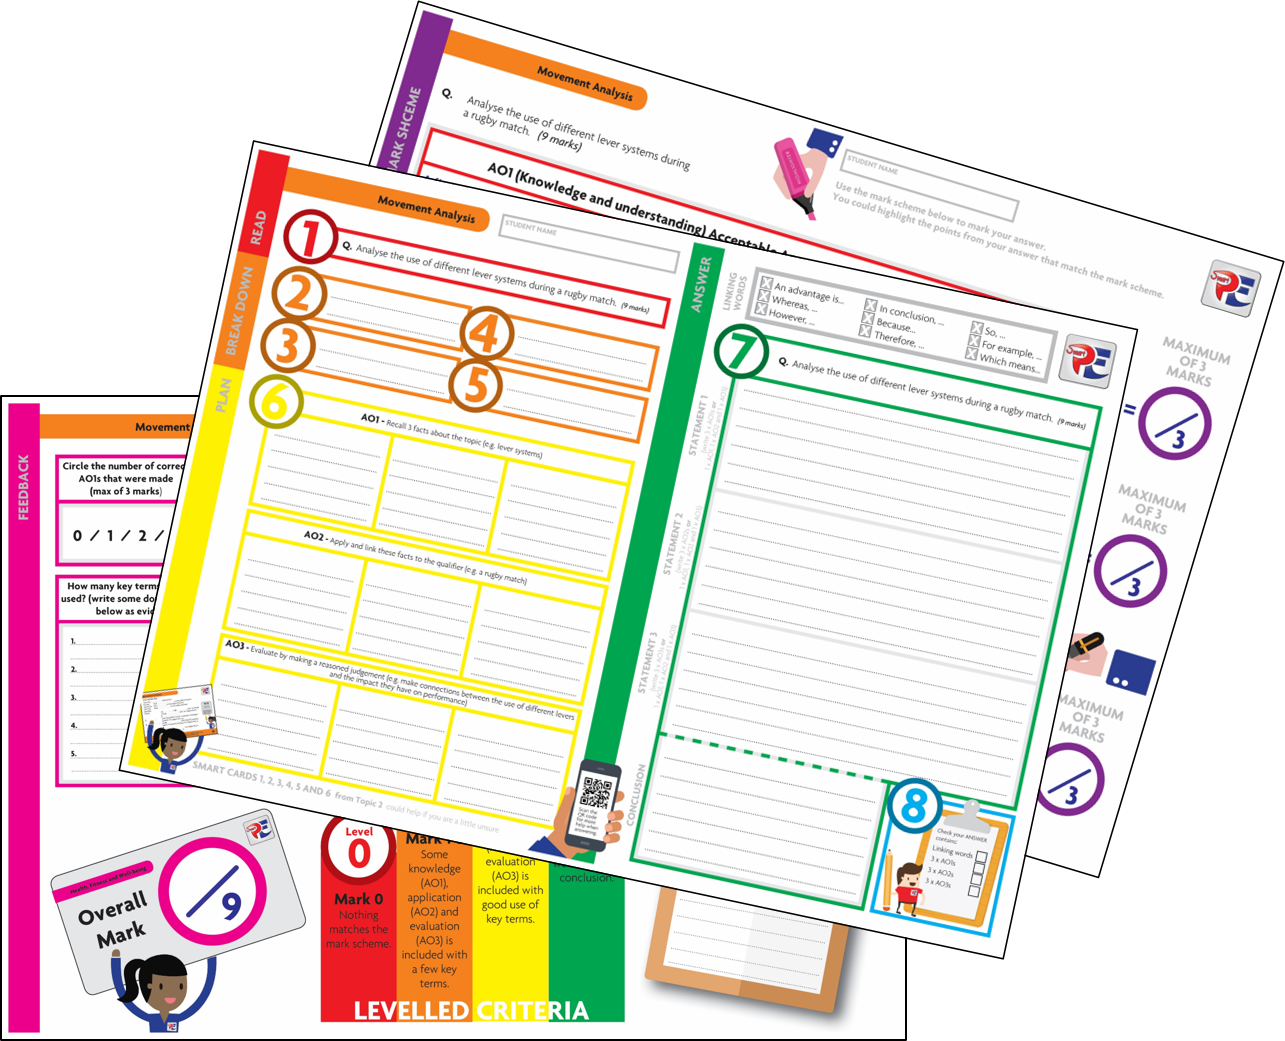 "Really like the layout of the planning and answer page, really helped students scaffold their answers. The mark scheme, also helped students structure and improve their answers..."